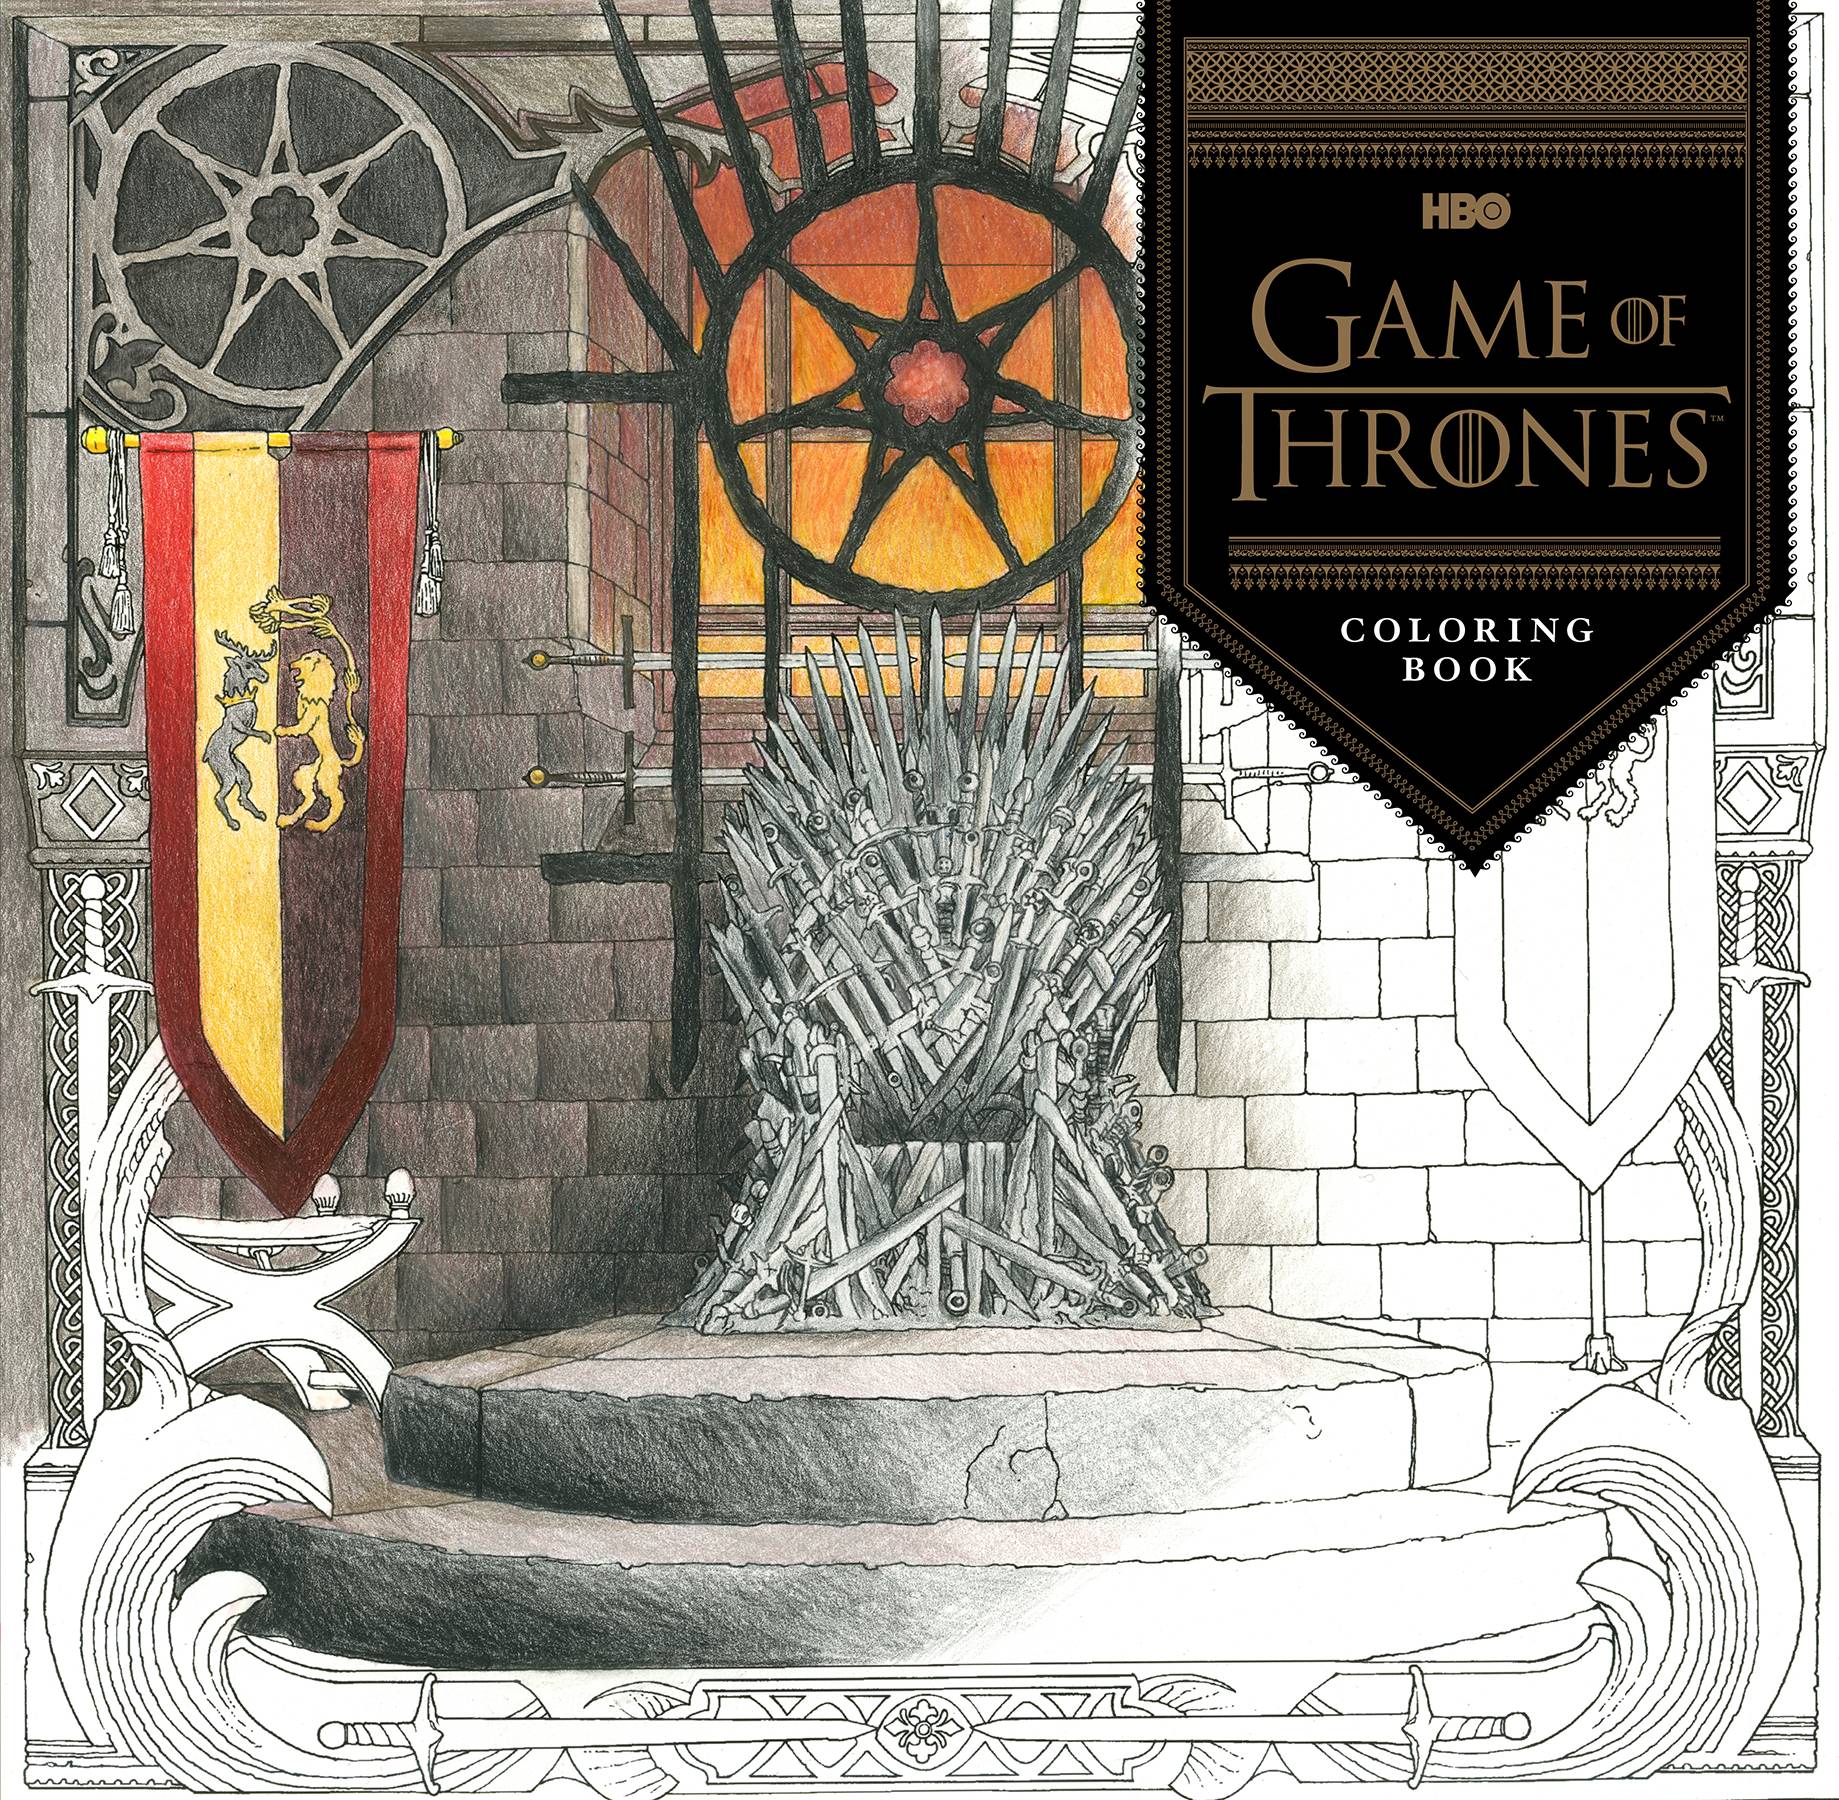 Hbo Game of Thrones Coloring Book